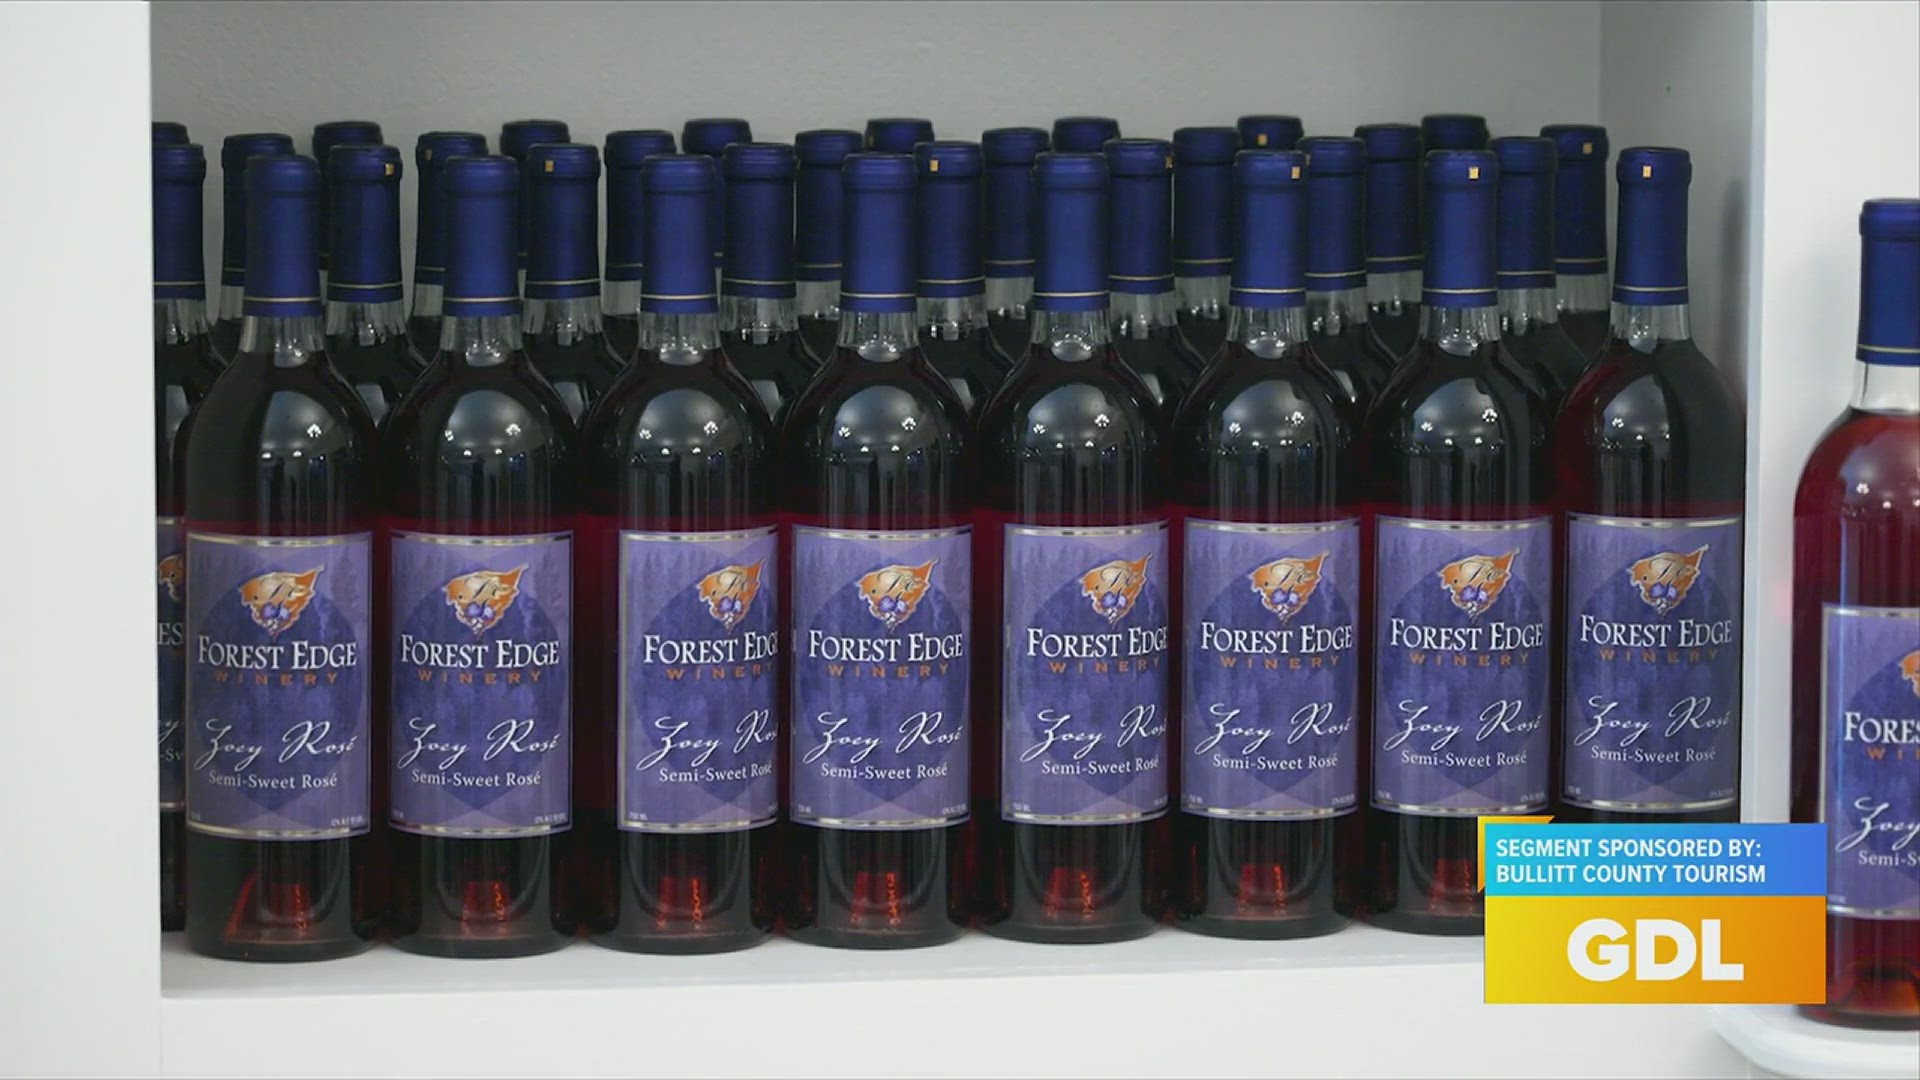 Forest Edge Winery makes original wine that locals love!